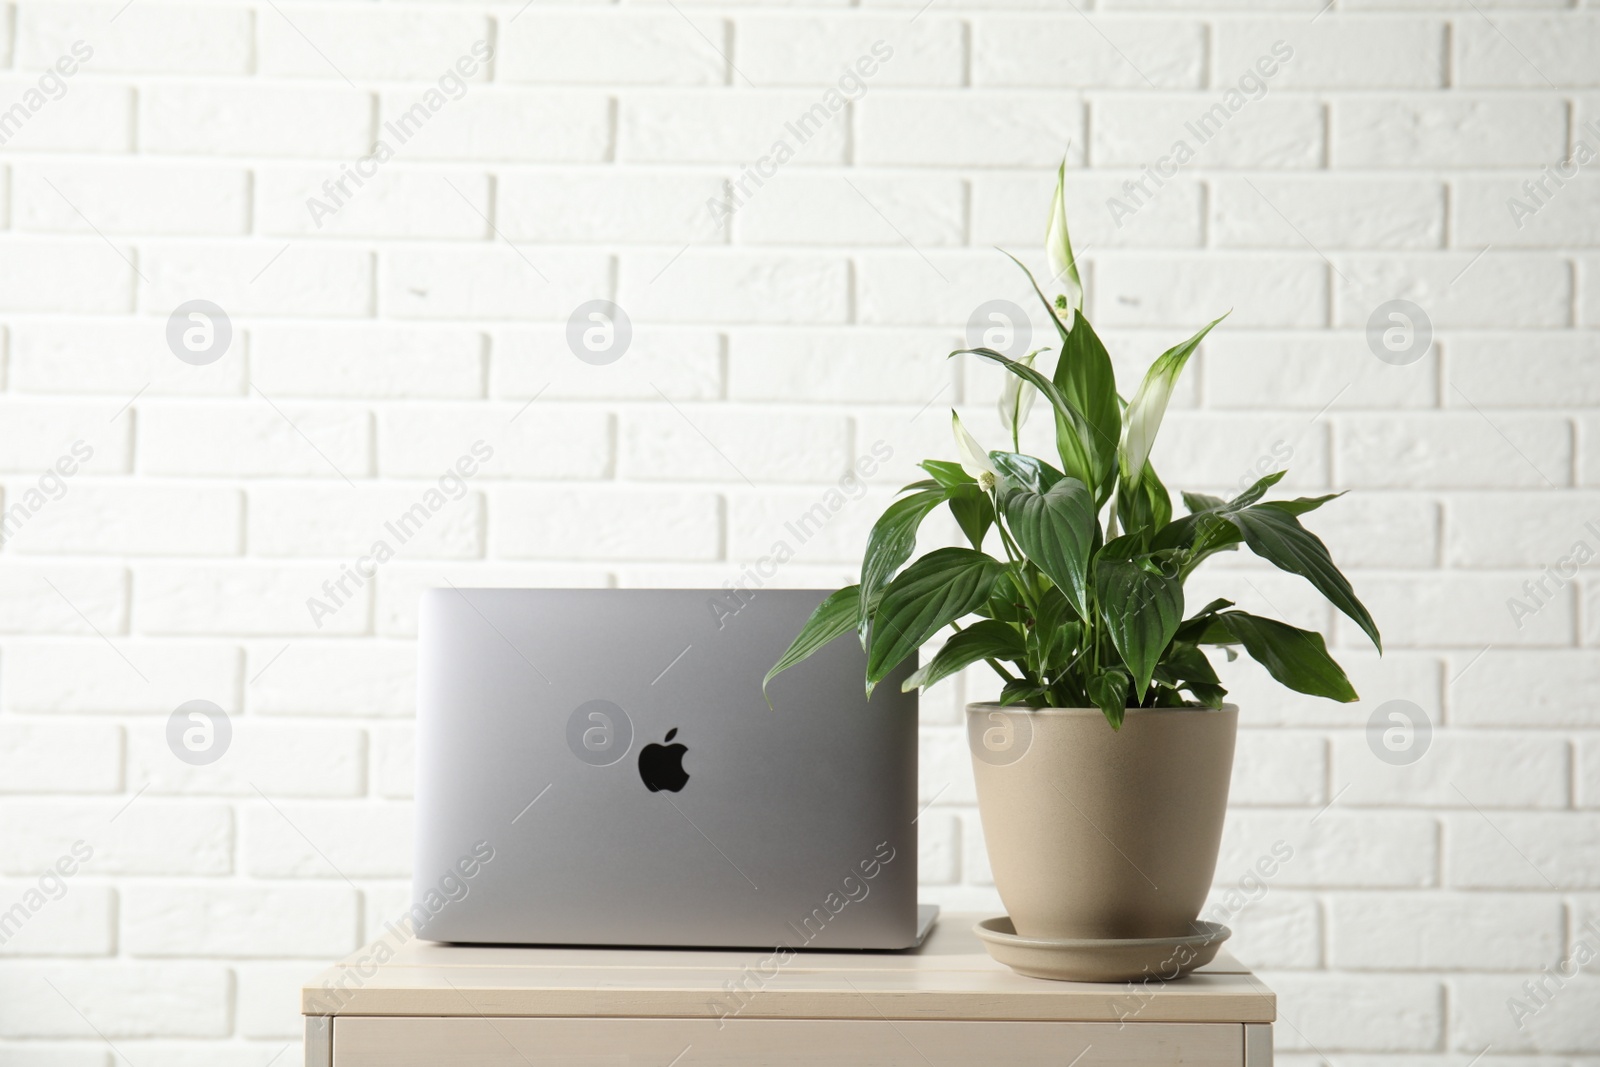 Photo of Spathiphyllum plant in pot and laptop on table near brick wall, space for text. Home decor